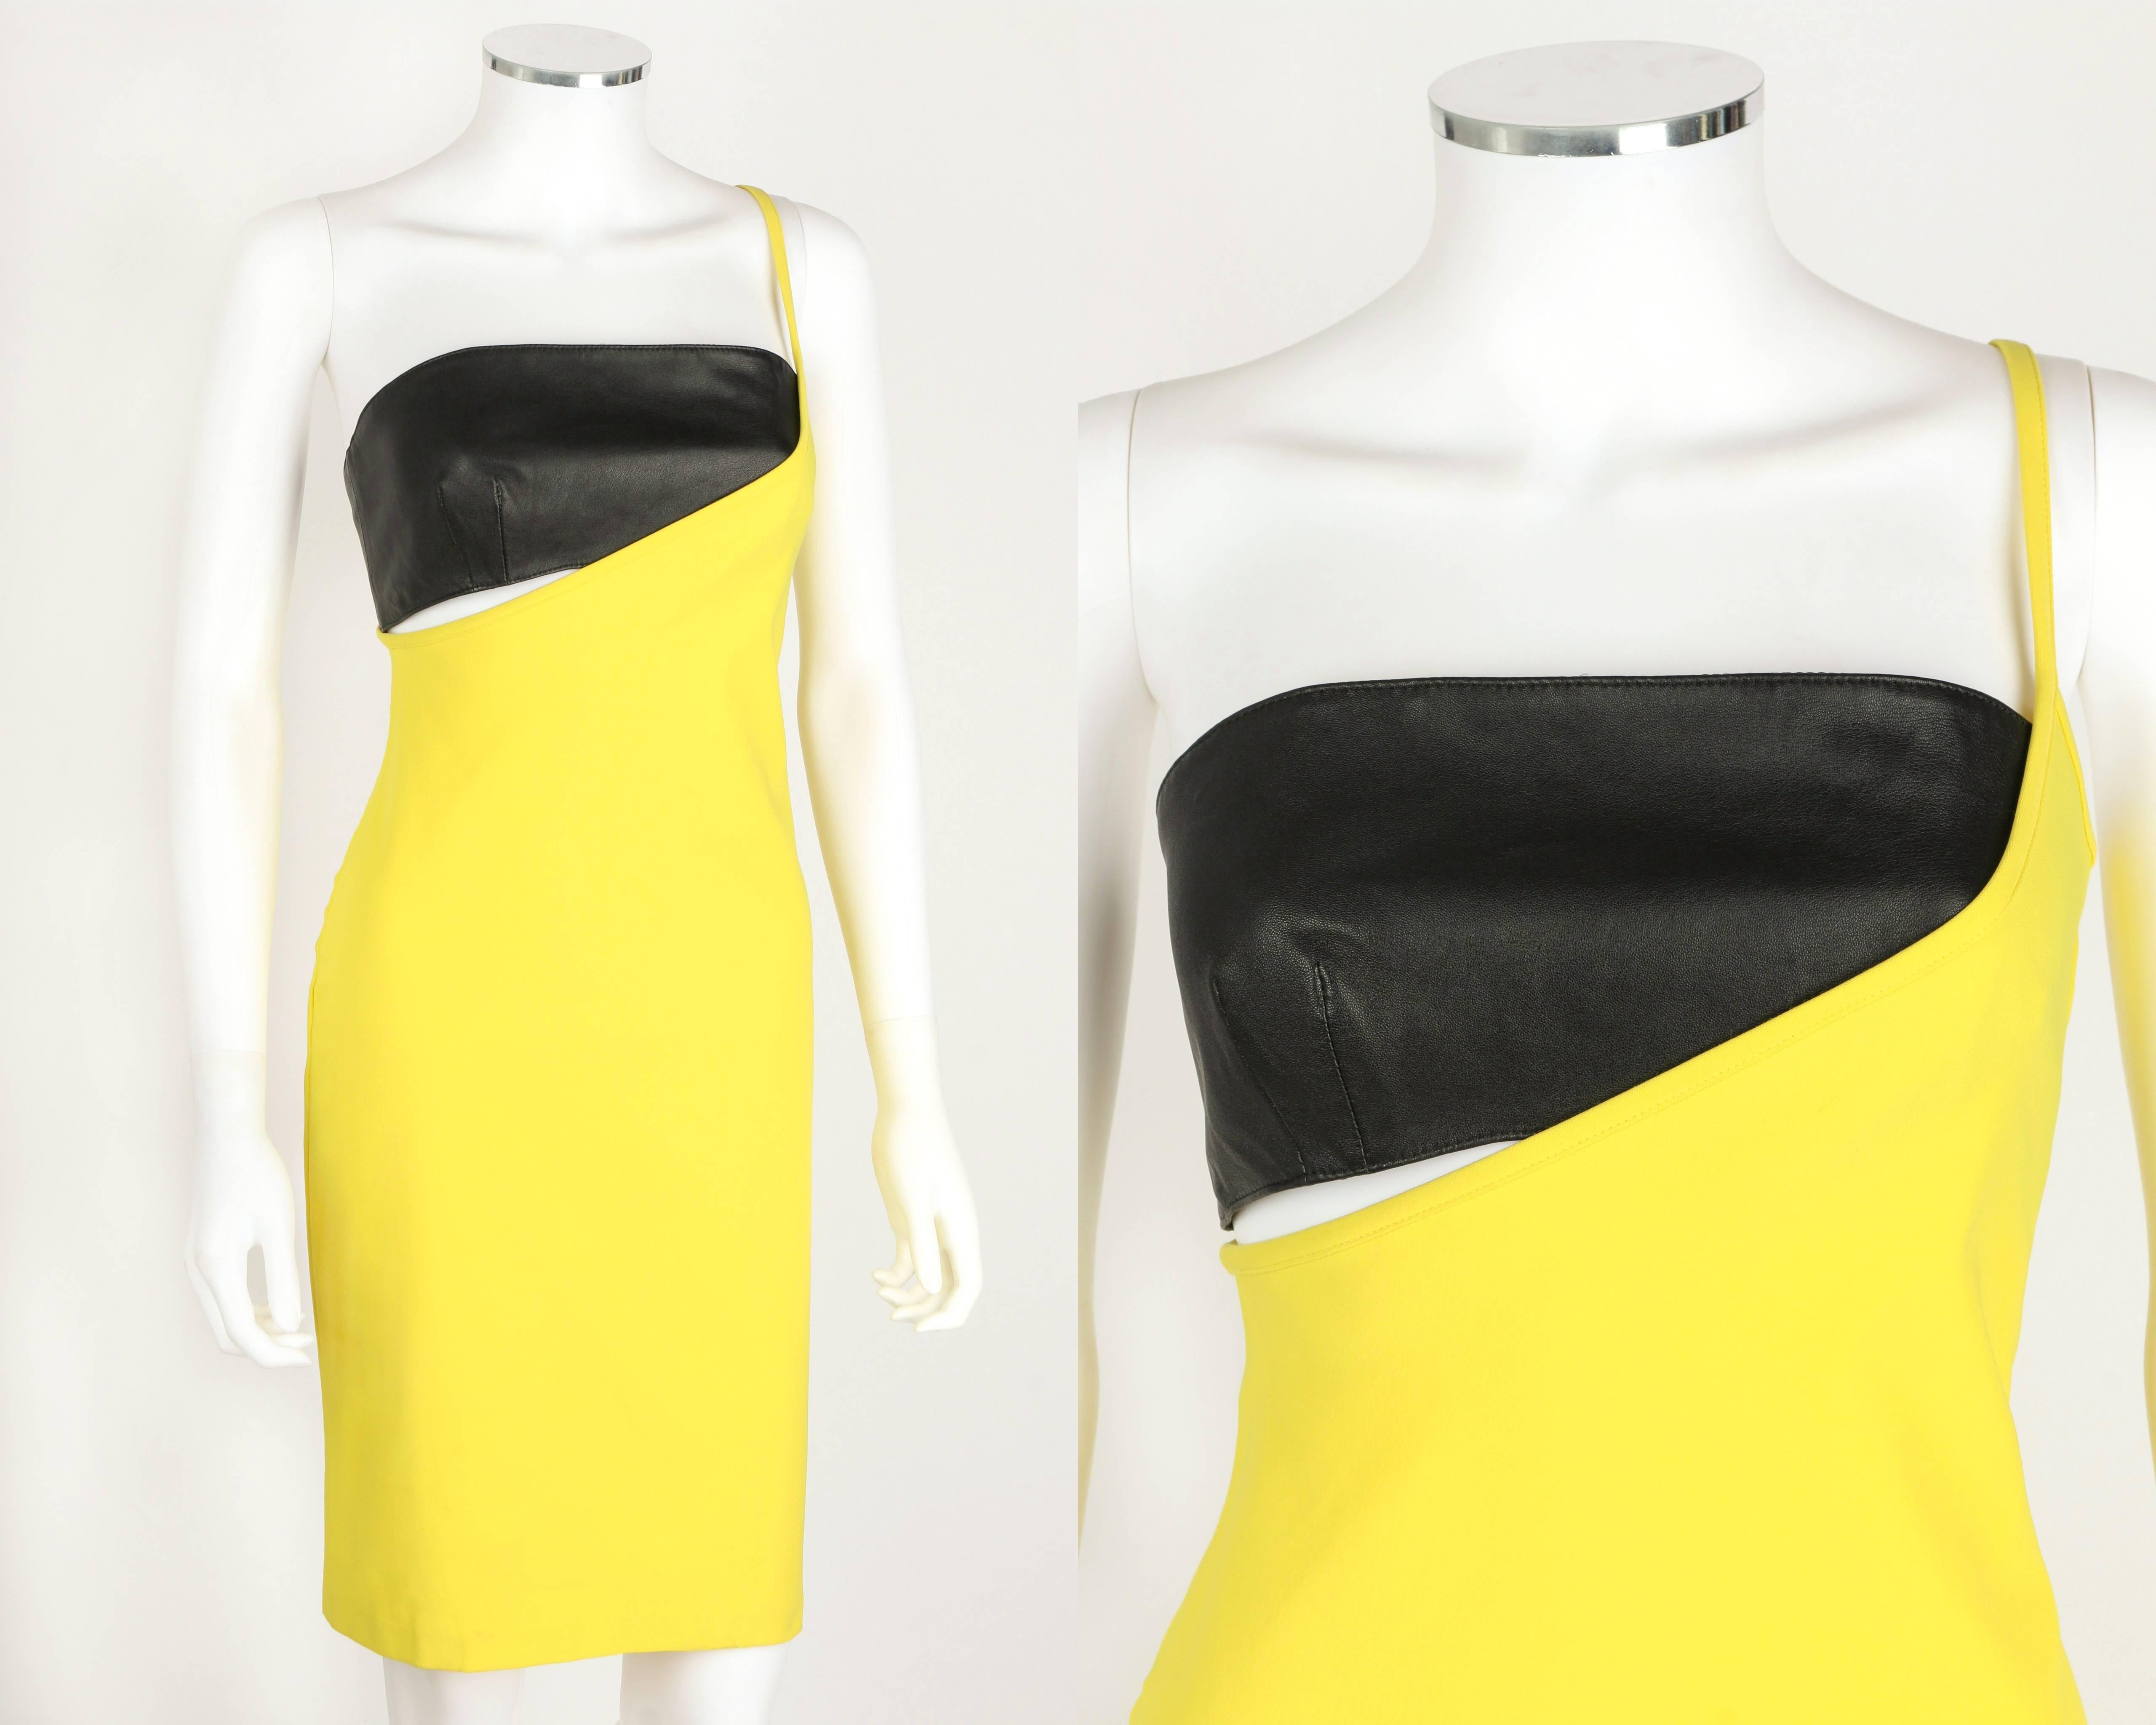 Versus Gianni Versace c.1990's yellow bodycon dress and leather bandeau top set. Single left side spaghetti strap. Pullover style. Black genuine leather bandeau top is fully lined and zips at left side. Knee length. Original tags attached. Please